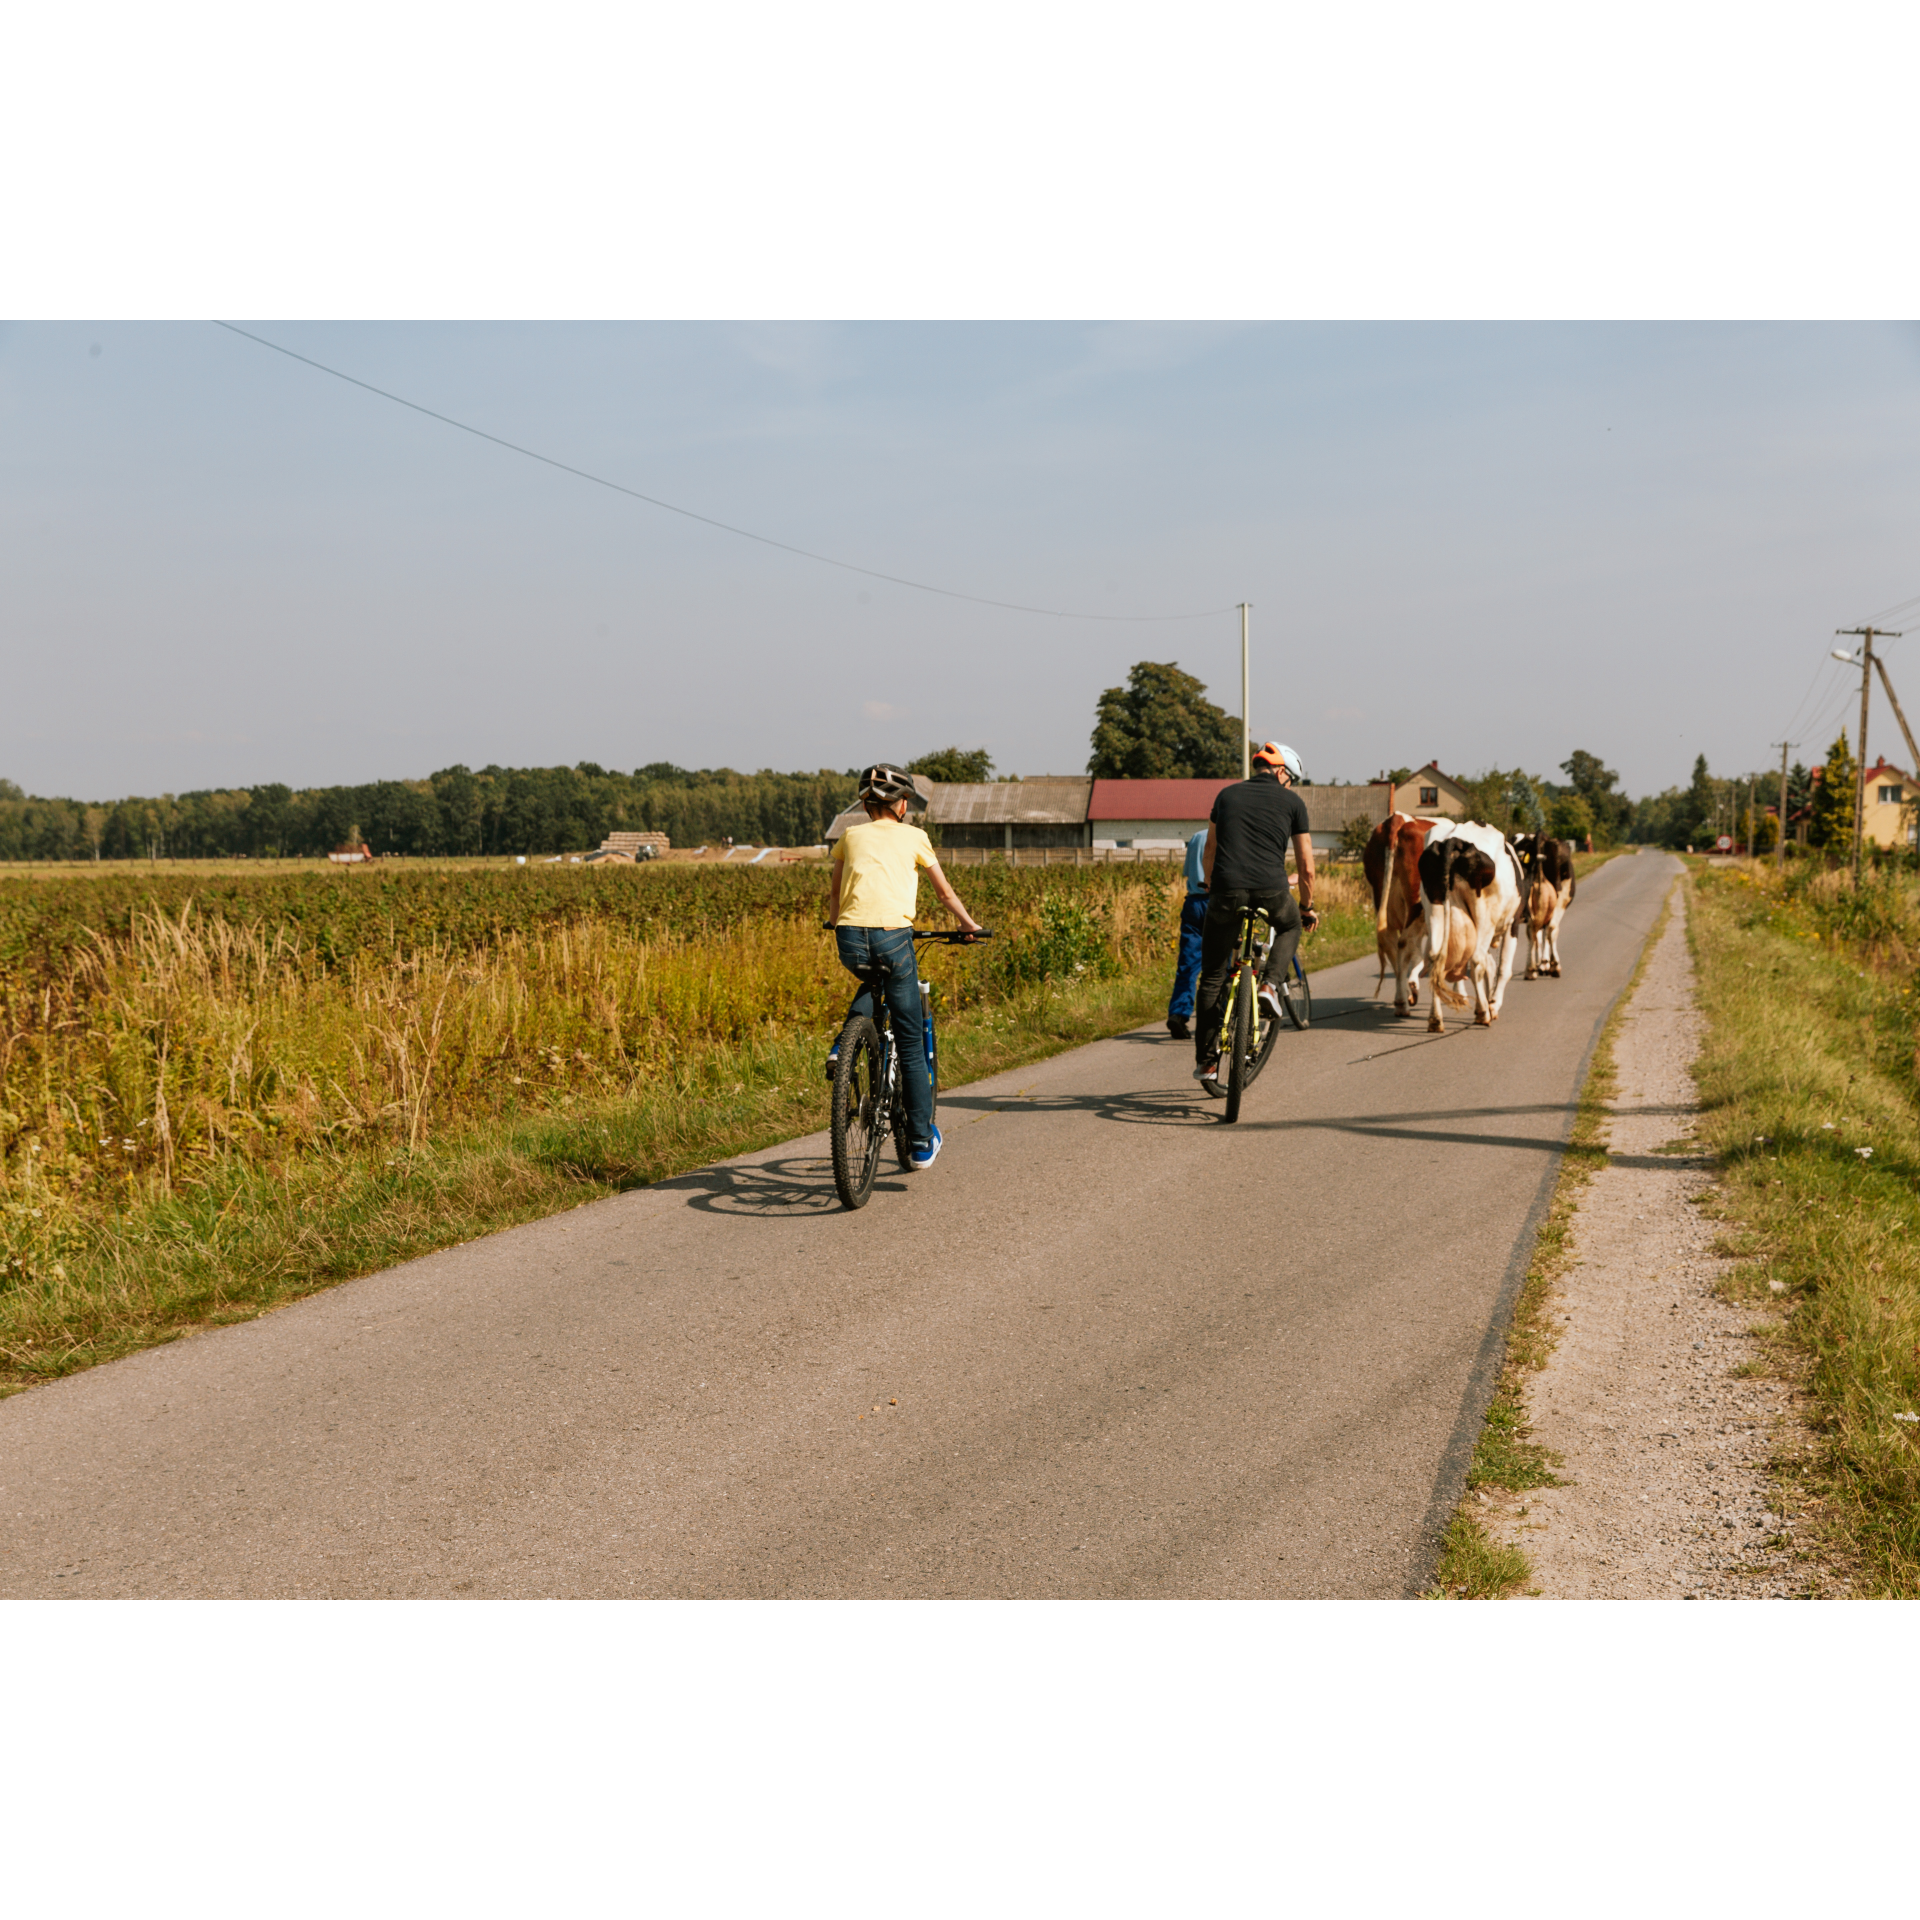 Cyclists and cows